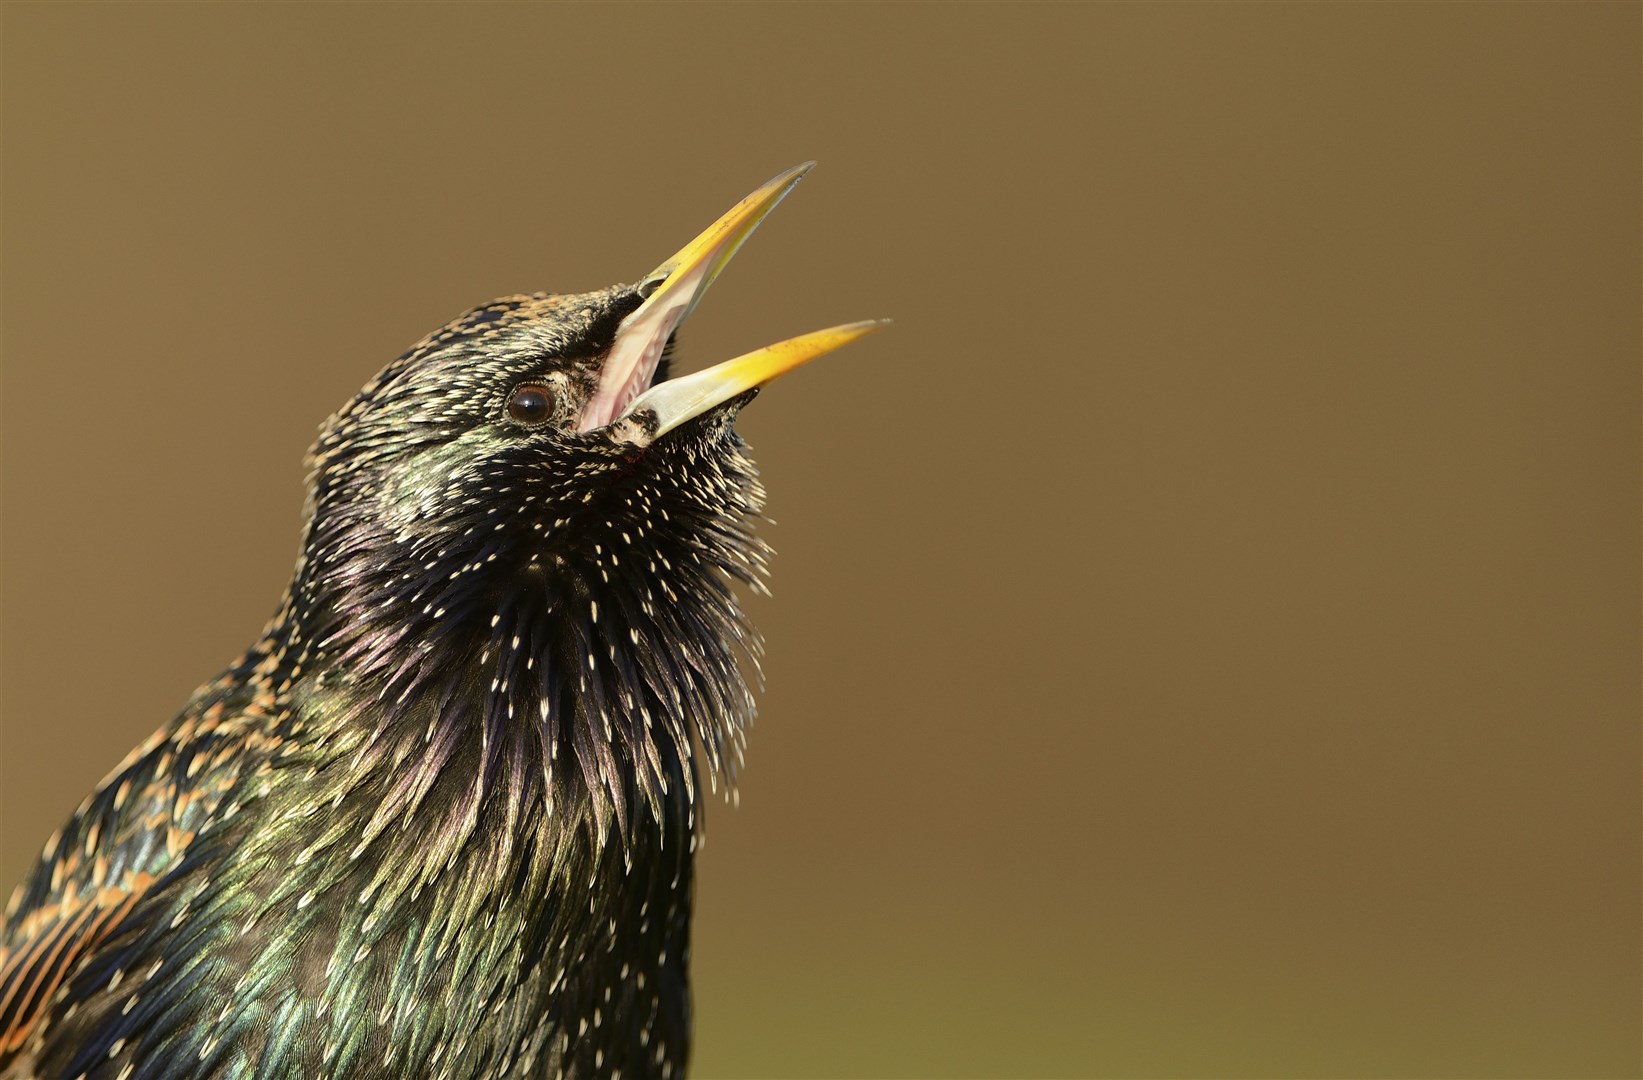 Starling (Sturnus vulgaris) were the second most recorded bird species in Scotland in the survey. Ben Andrew (rspb-images.com)